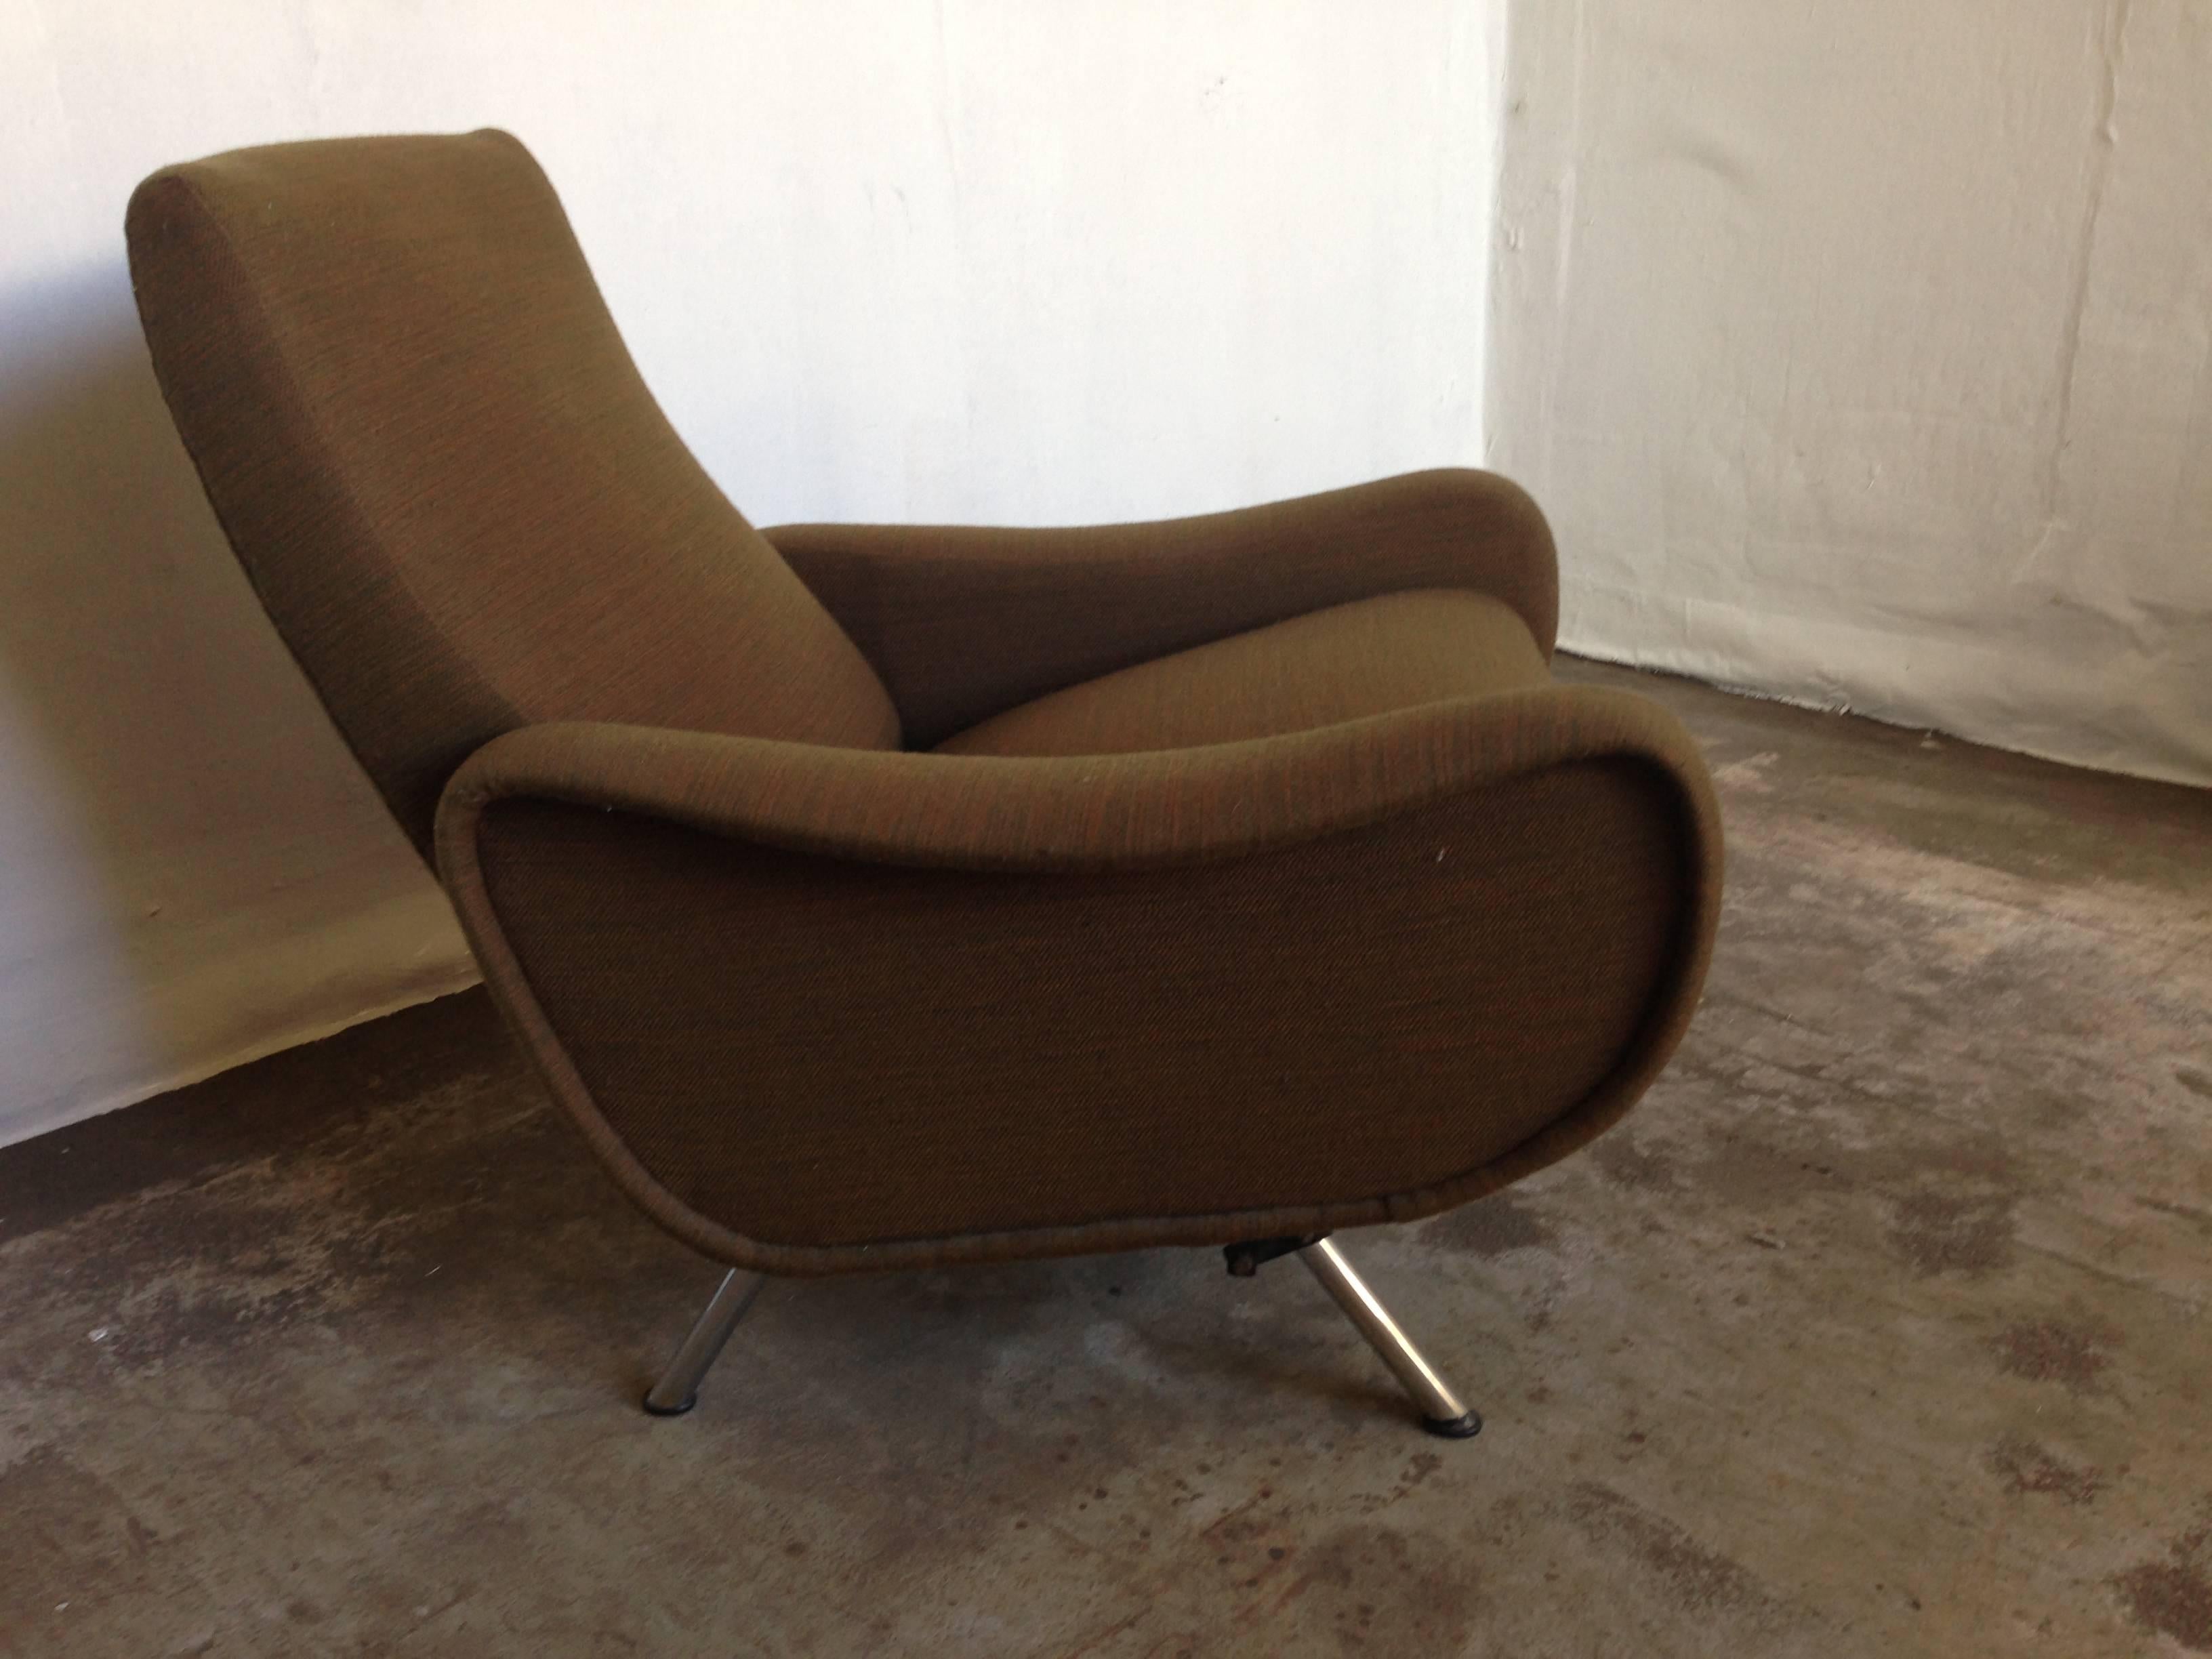 Lady chair by Marco Zanuso for Arflex with adjustable back and footrest.
This one your dont see very often.
 